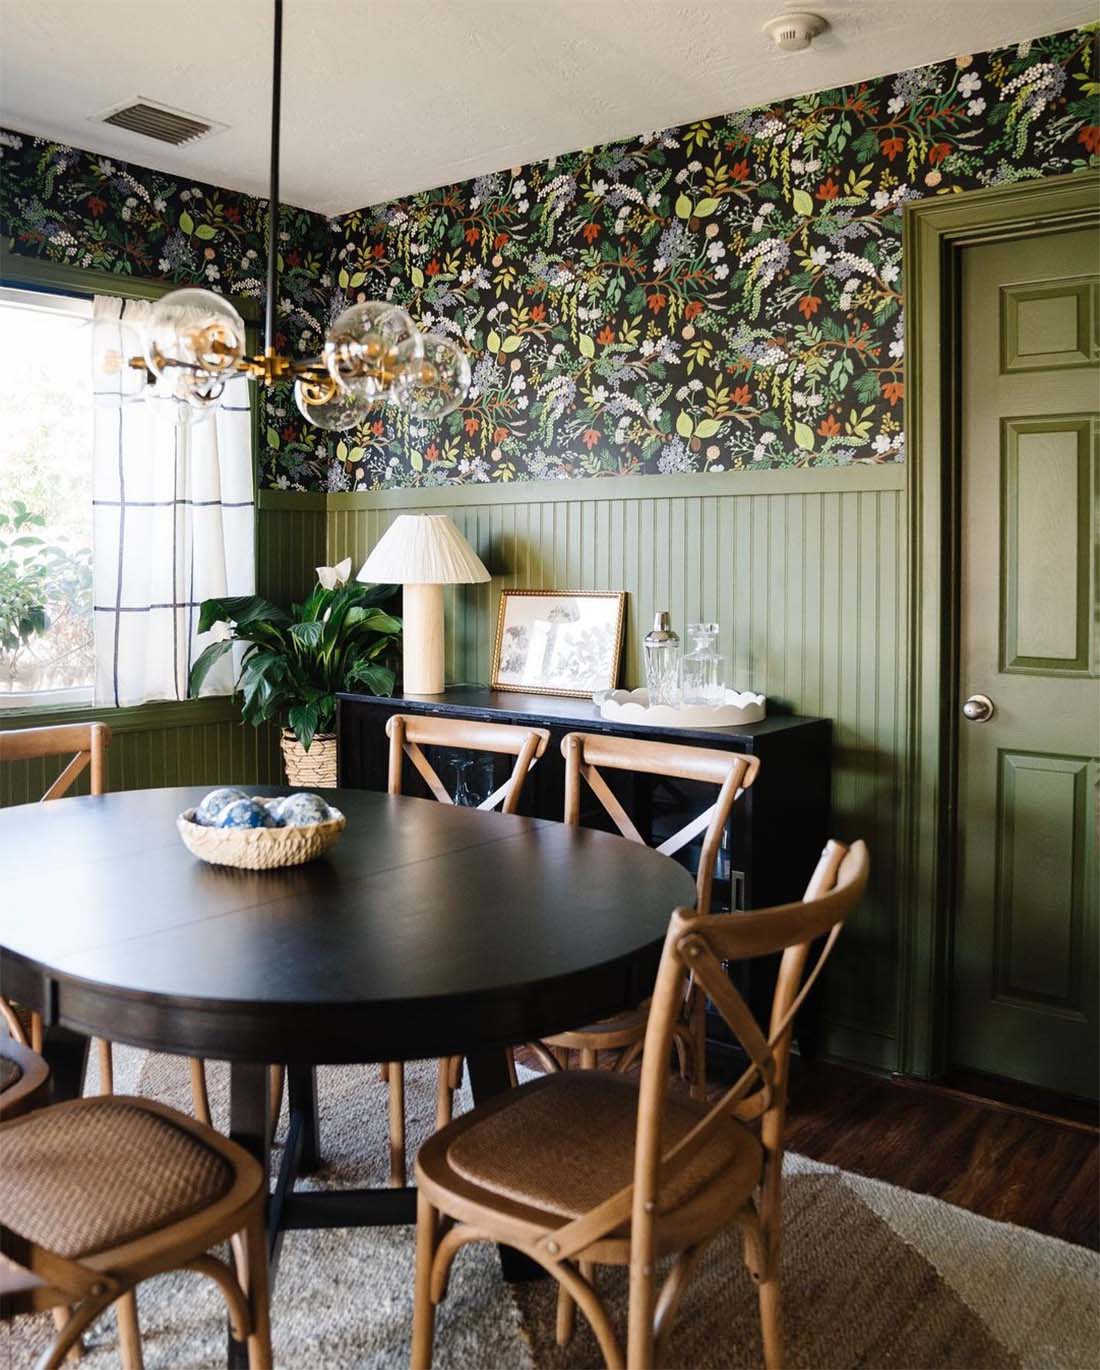 peel-and-stick-wallpaper-pros-and-cons-green-dining-room-done-well-by-blushingbungalow